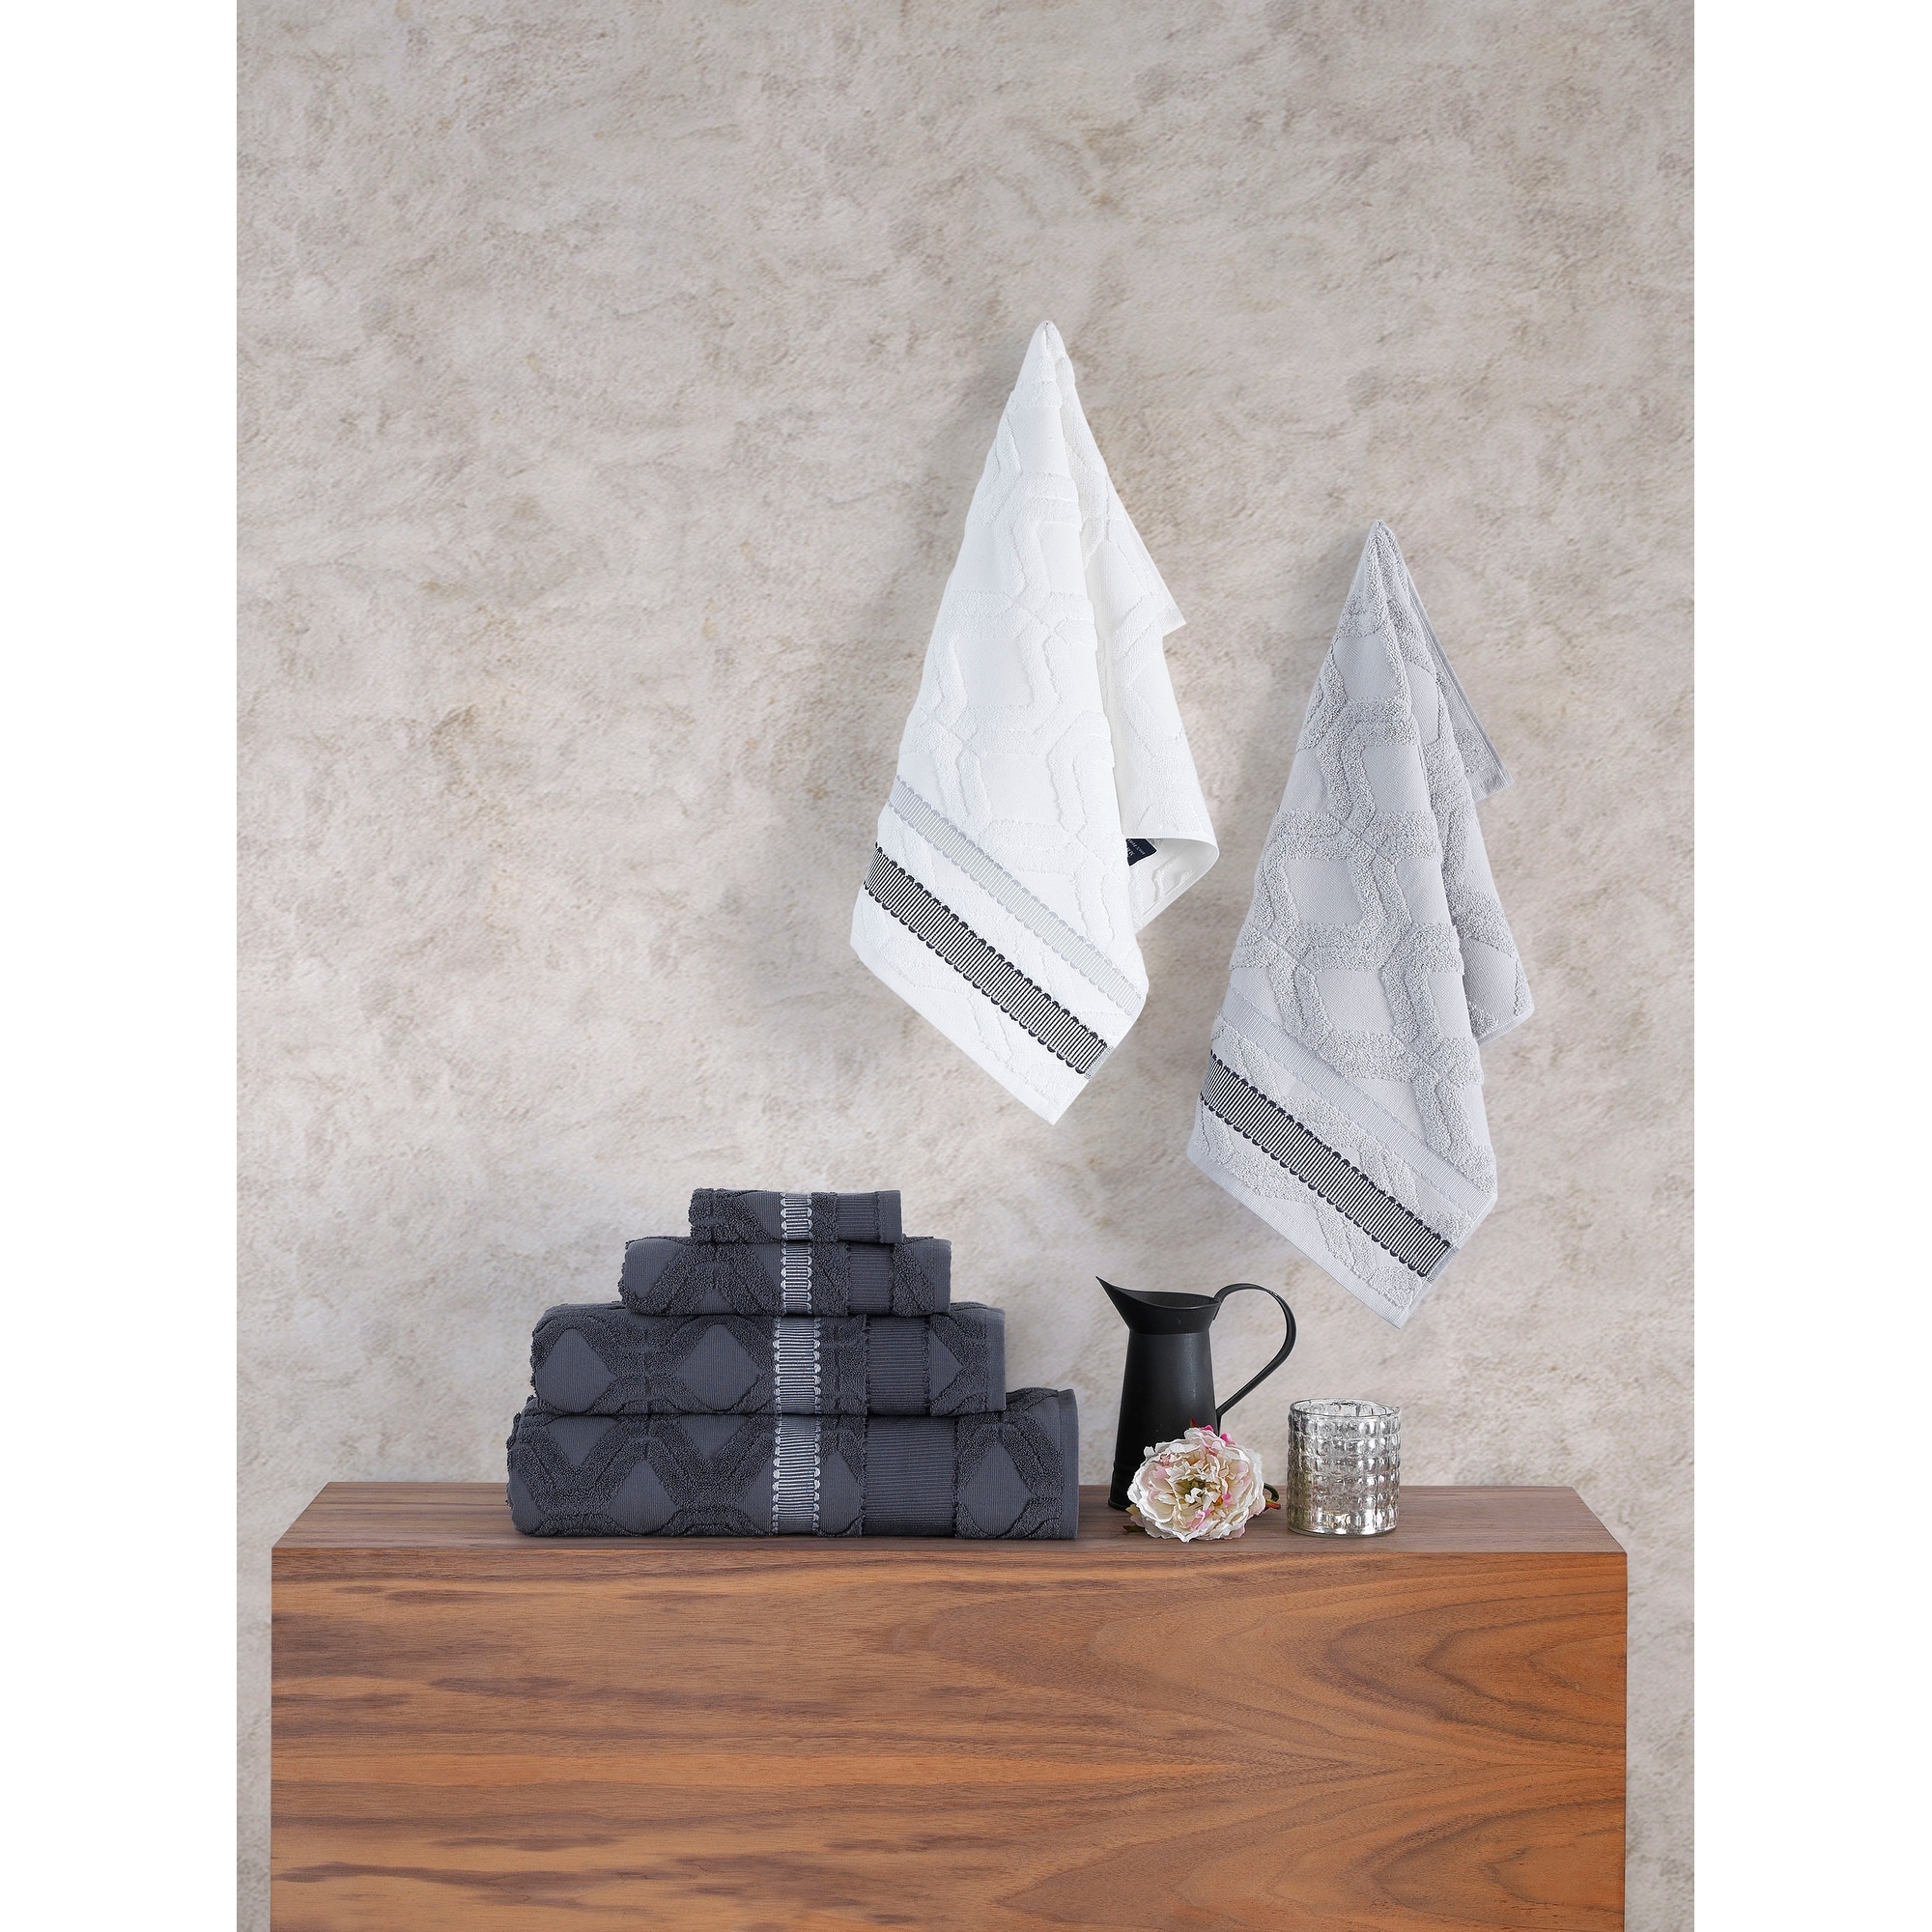 https://ak1.ostkcdn.com/images/products/is/images/direct/9daaa7964604c16c9d6c5d57d8f614b56fdcda02/Brooks-Brothers-Large-Square-Bath-Towel.jpg